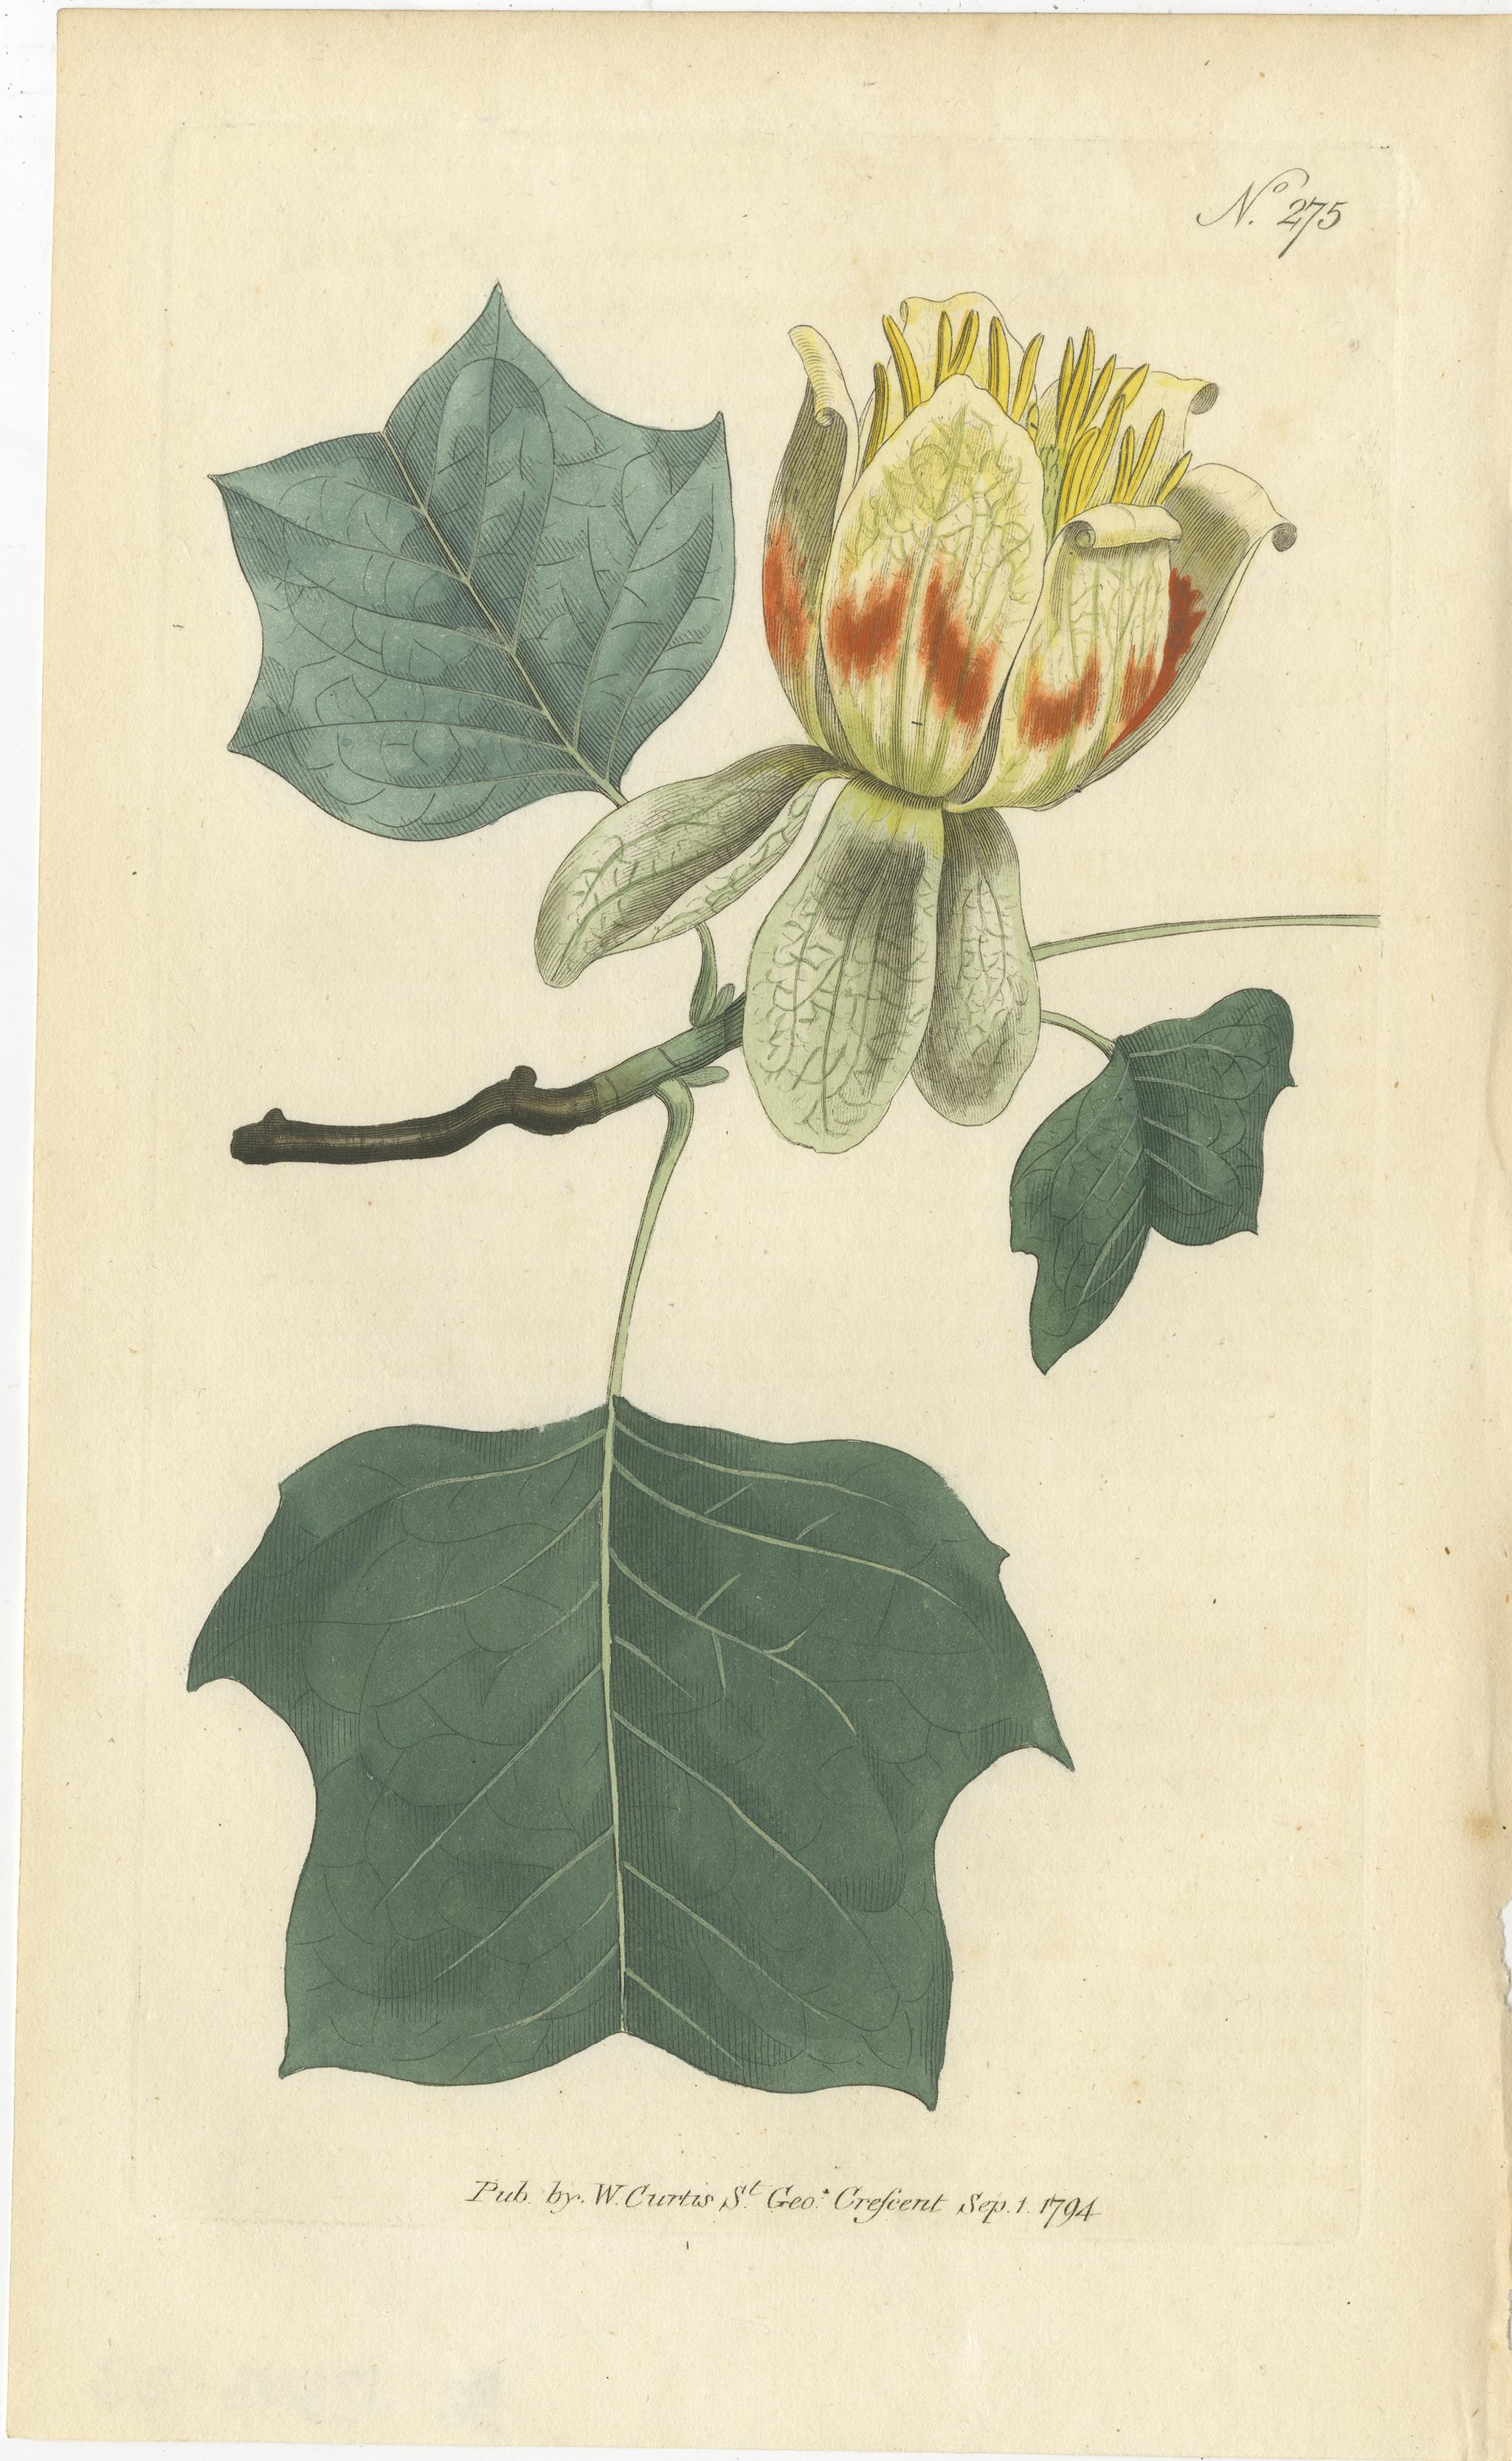 Antique botany print of the common tulip tree. This print originates from 'The Botanical Magazine; or Flower-Garden Displayed (..)' by William Curtis. Published 1794. 

The Botanical Magazine; or Flower-Garden Displayed, is an illustrated